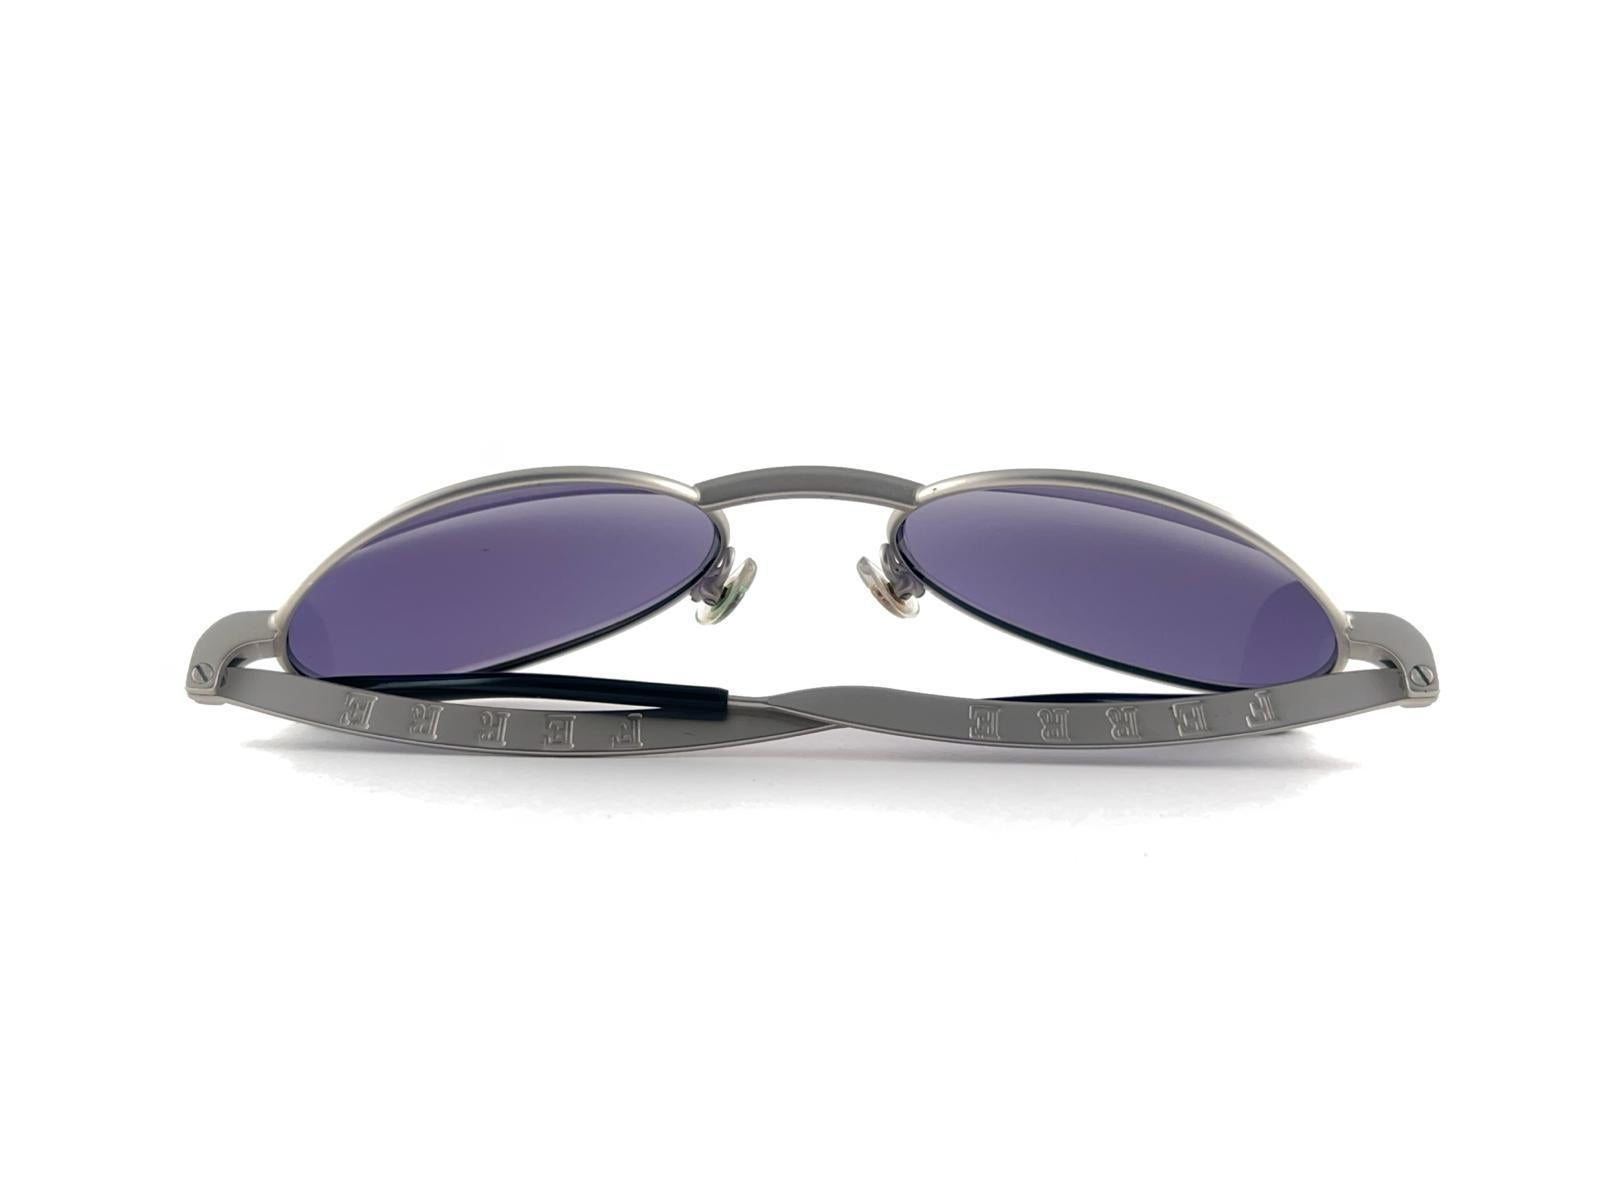 New Vintage Gianfranco Ferre Sunglasses

Oval Silver brushed metallic Frame Holding A Pair Of Spotless Purple Lenses
  
New, Never Worn Or Displayed
 
This Item May Show Minor Sign Of Wear Due To Storage



 Made In Italy



Front                   